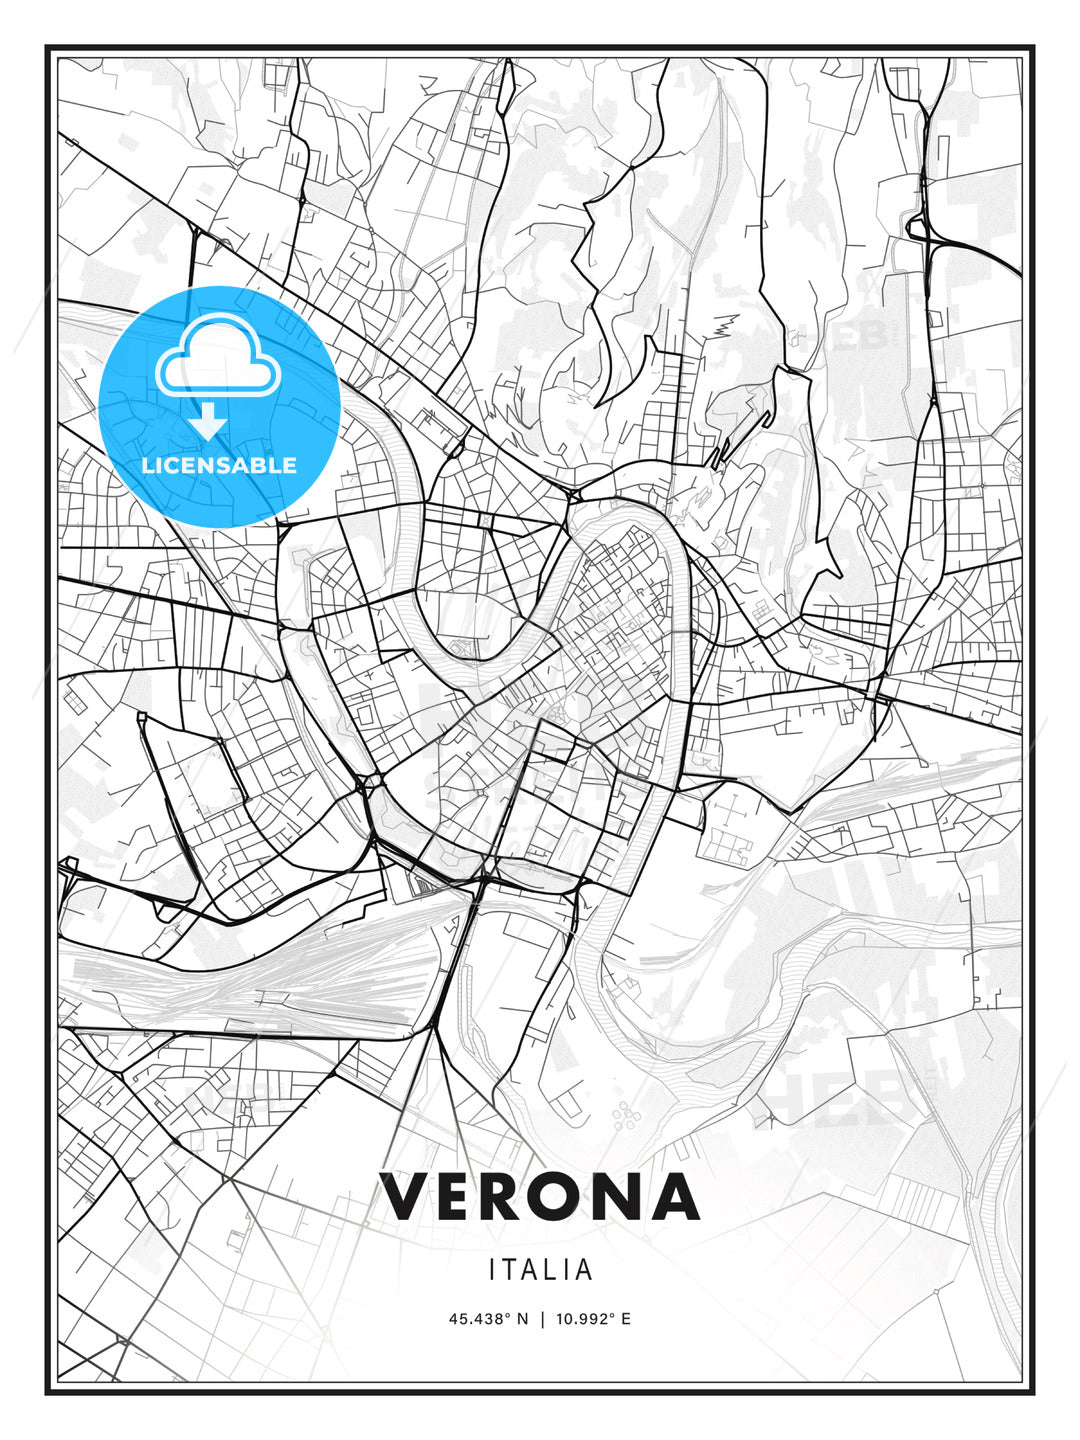 Verona, Italy, Modern Print Template in Various Formats - HEBSTREITS Sketches